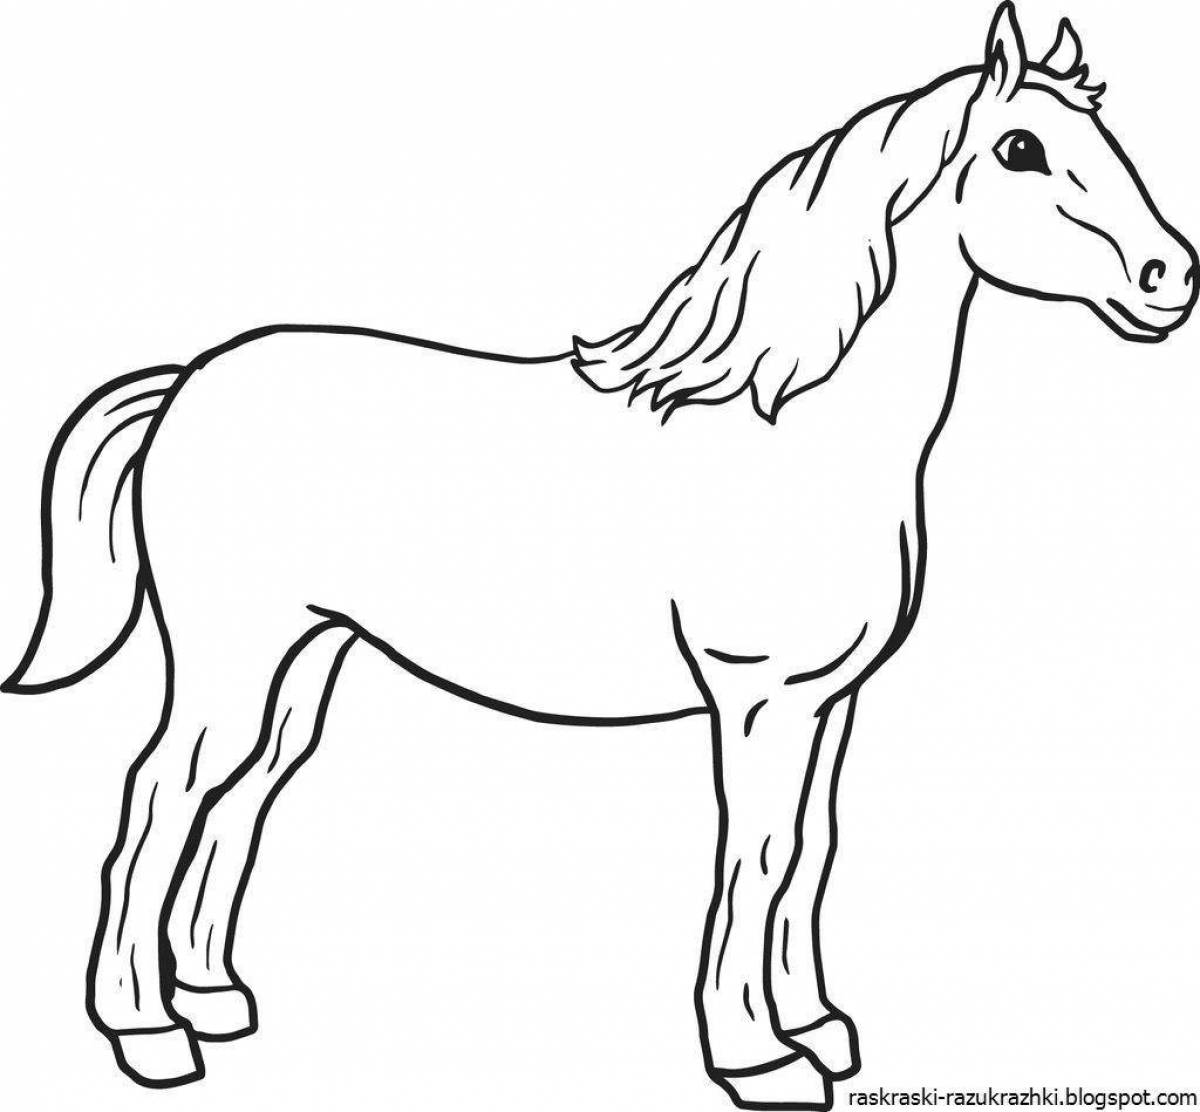 Inspirational horse drawing for kids